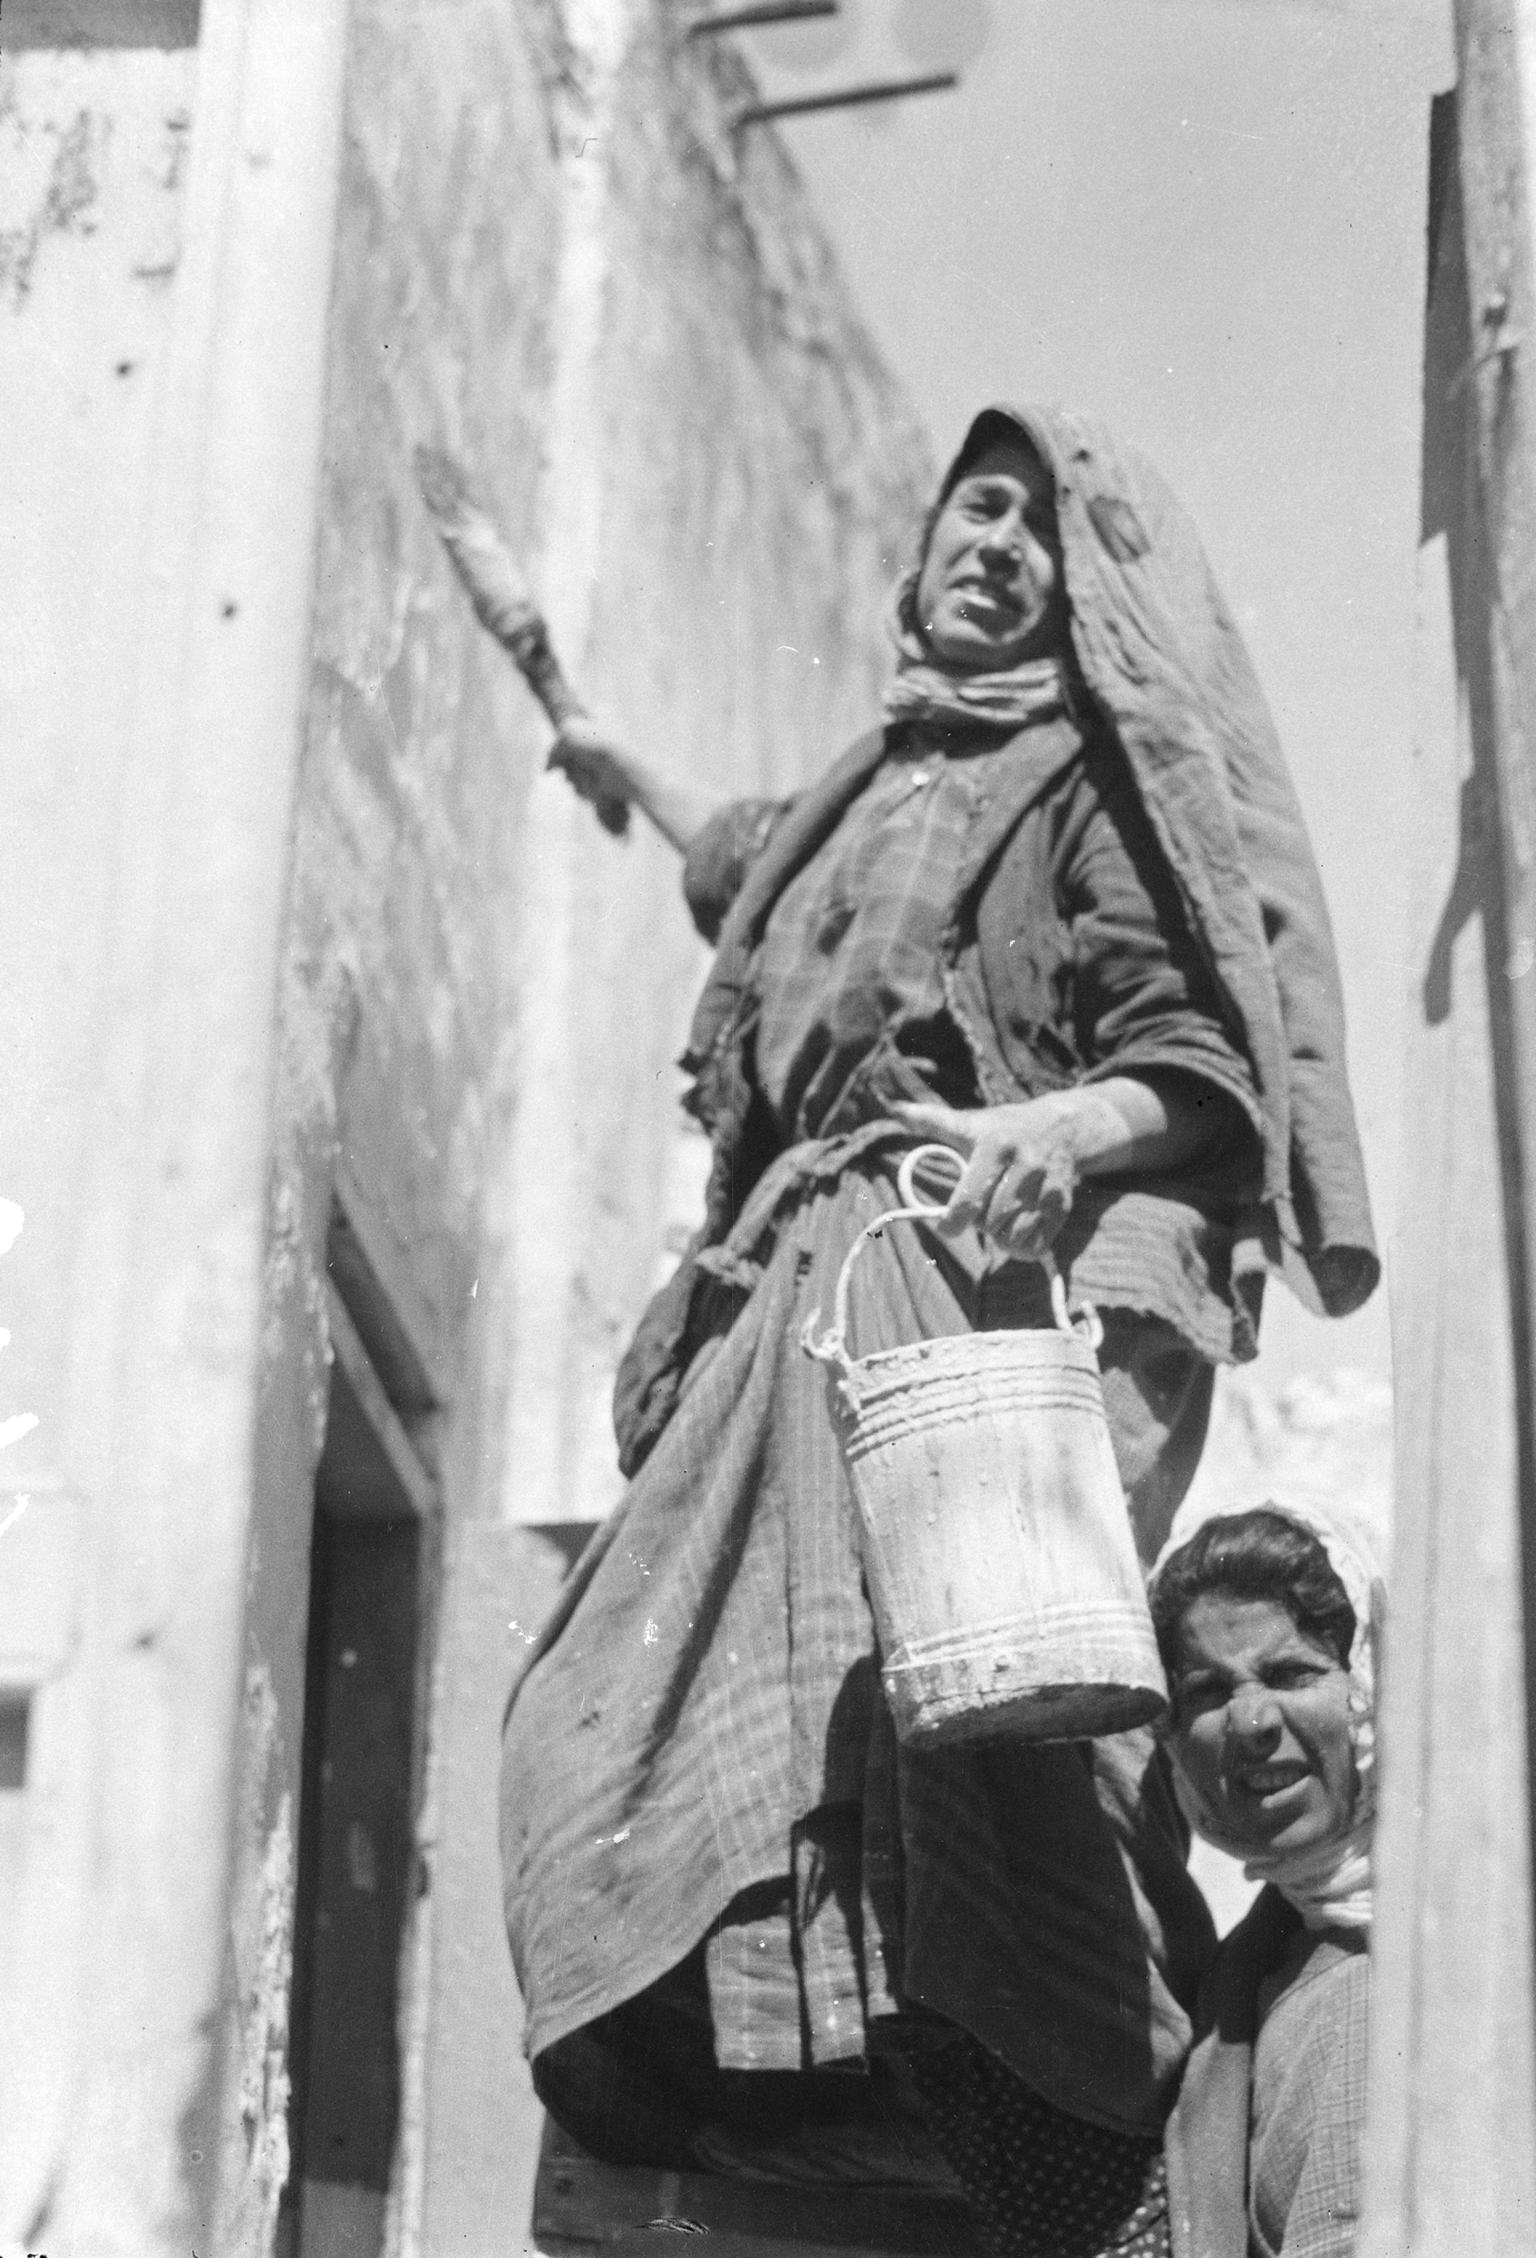 Photograph of woman in headscarf looking toward camera, holding bucket and paintbrush next to wall, with woman behind her looking at camera.